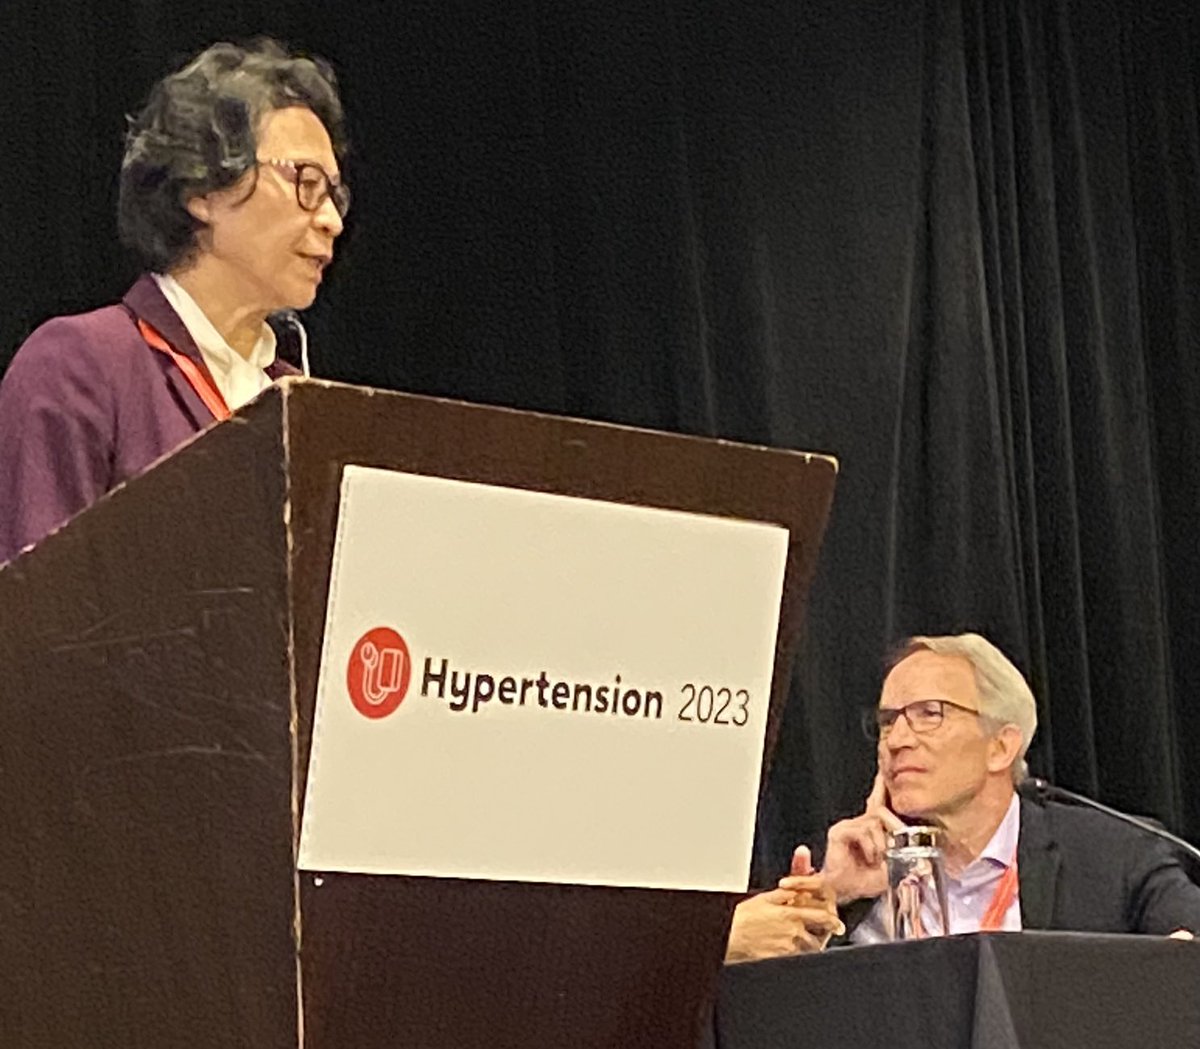 Happening now! Fantastic talk by Dr. Wei on why the ⁦@jacksonlab⁩ Rag1 knockout mice lost the phenotype of being protected from hypertension at #Hypertension23 ⁦@CouncilonHTN⁩ ⁦@AHAScience⁩ Reason to move beyond RAG1 in studying HTN pubmed.ncbi.nlm.nih.gov/32078385/